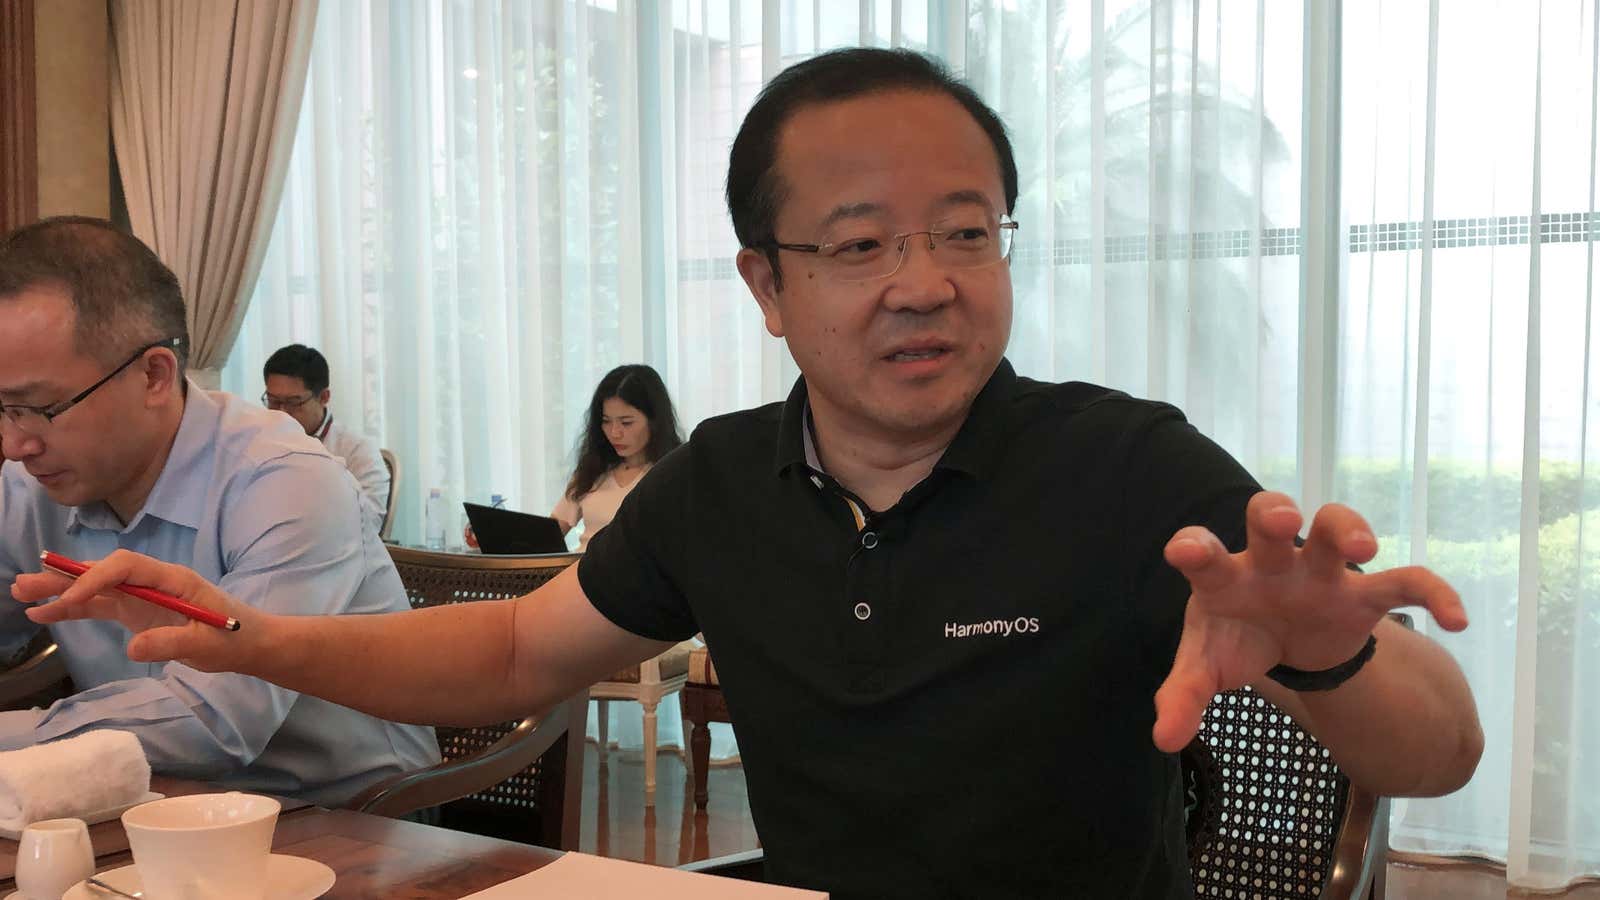 Wang Chenglu, president of Huawei Consumer Business Group’s Software Department, talks about the HarmonyOS operating system during a media roundtable at the Huawei headquarters in…